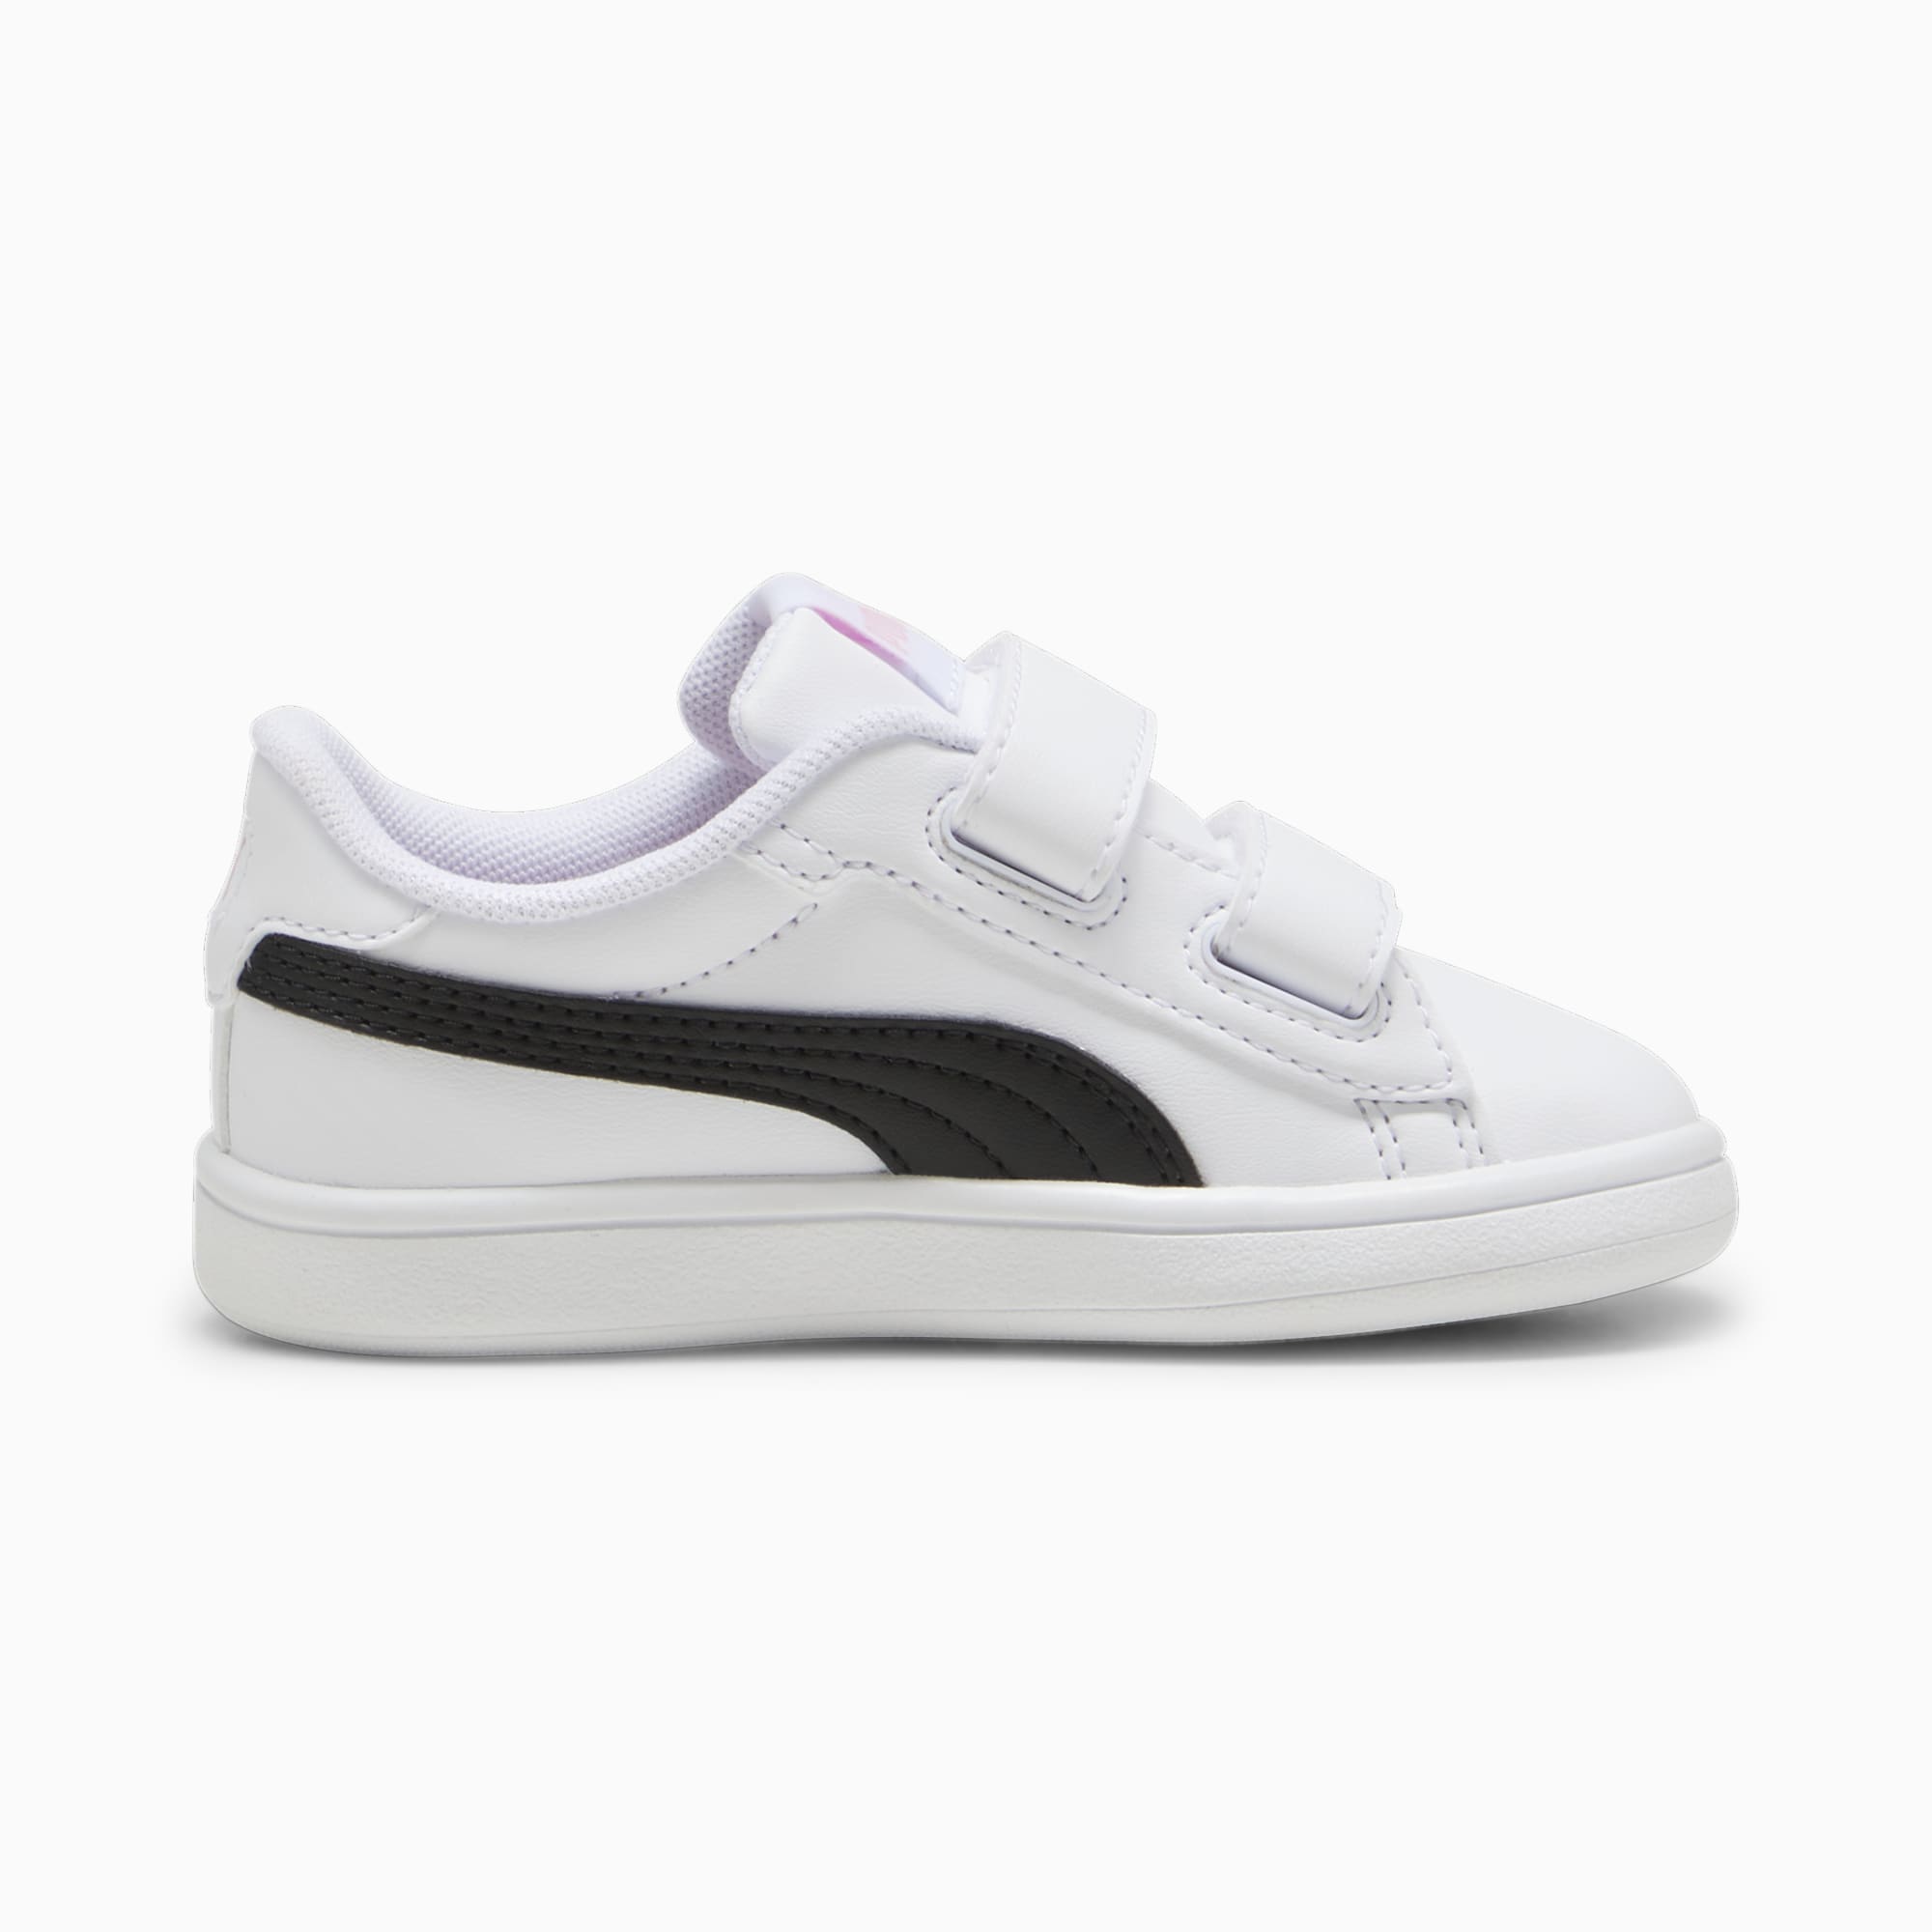 PUMA Smash 3.0 Dance Party Toddlers' Sneakers, White/Black/Pink Lilac, Size 19, Shoes